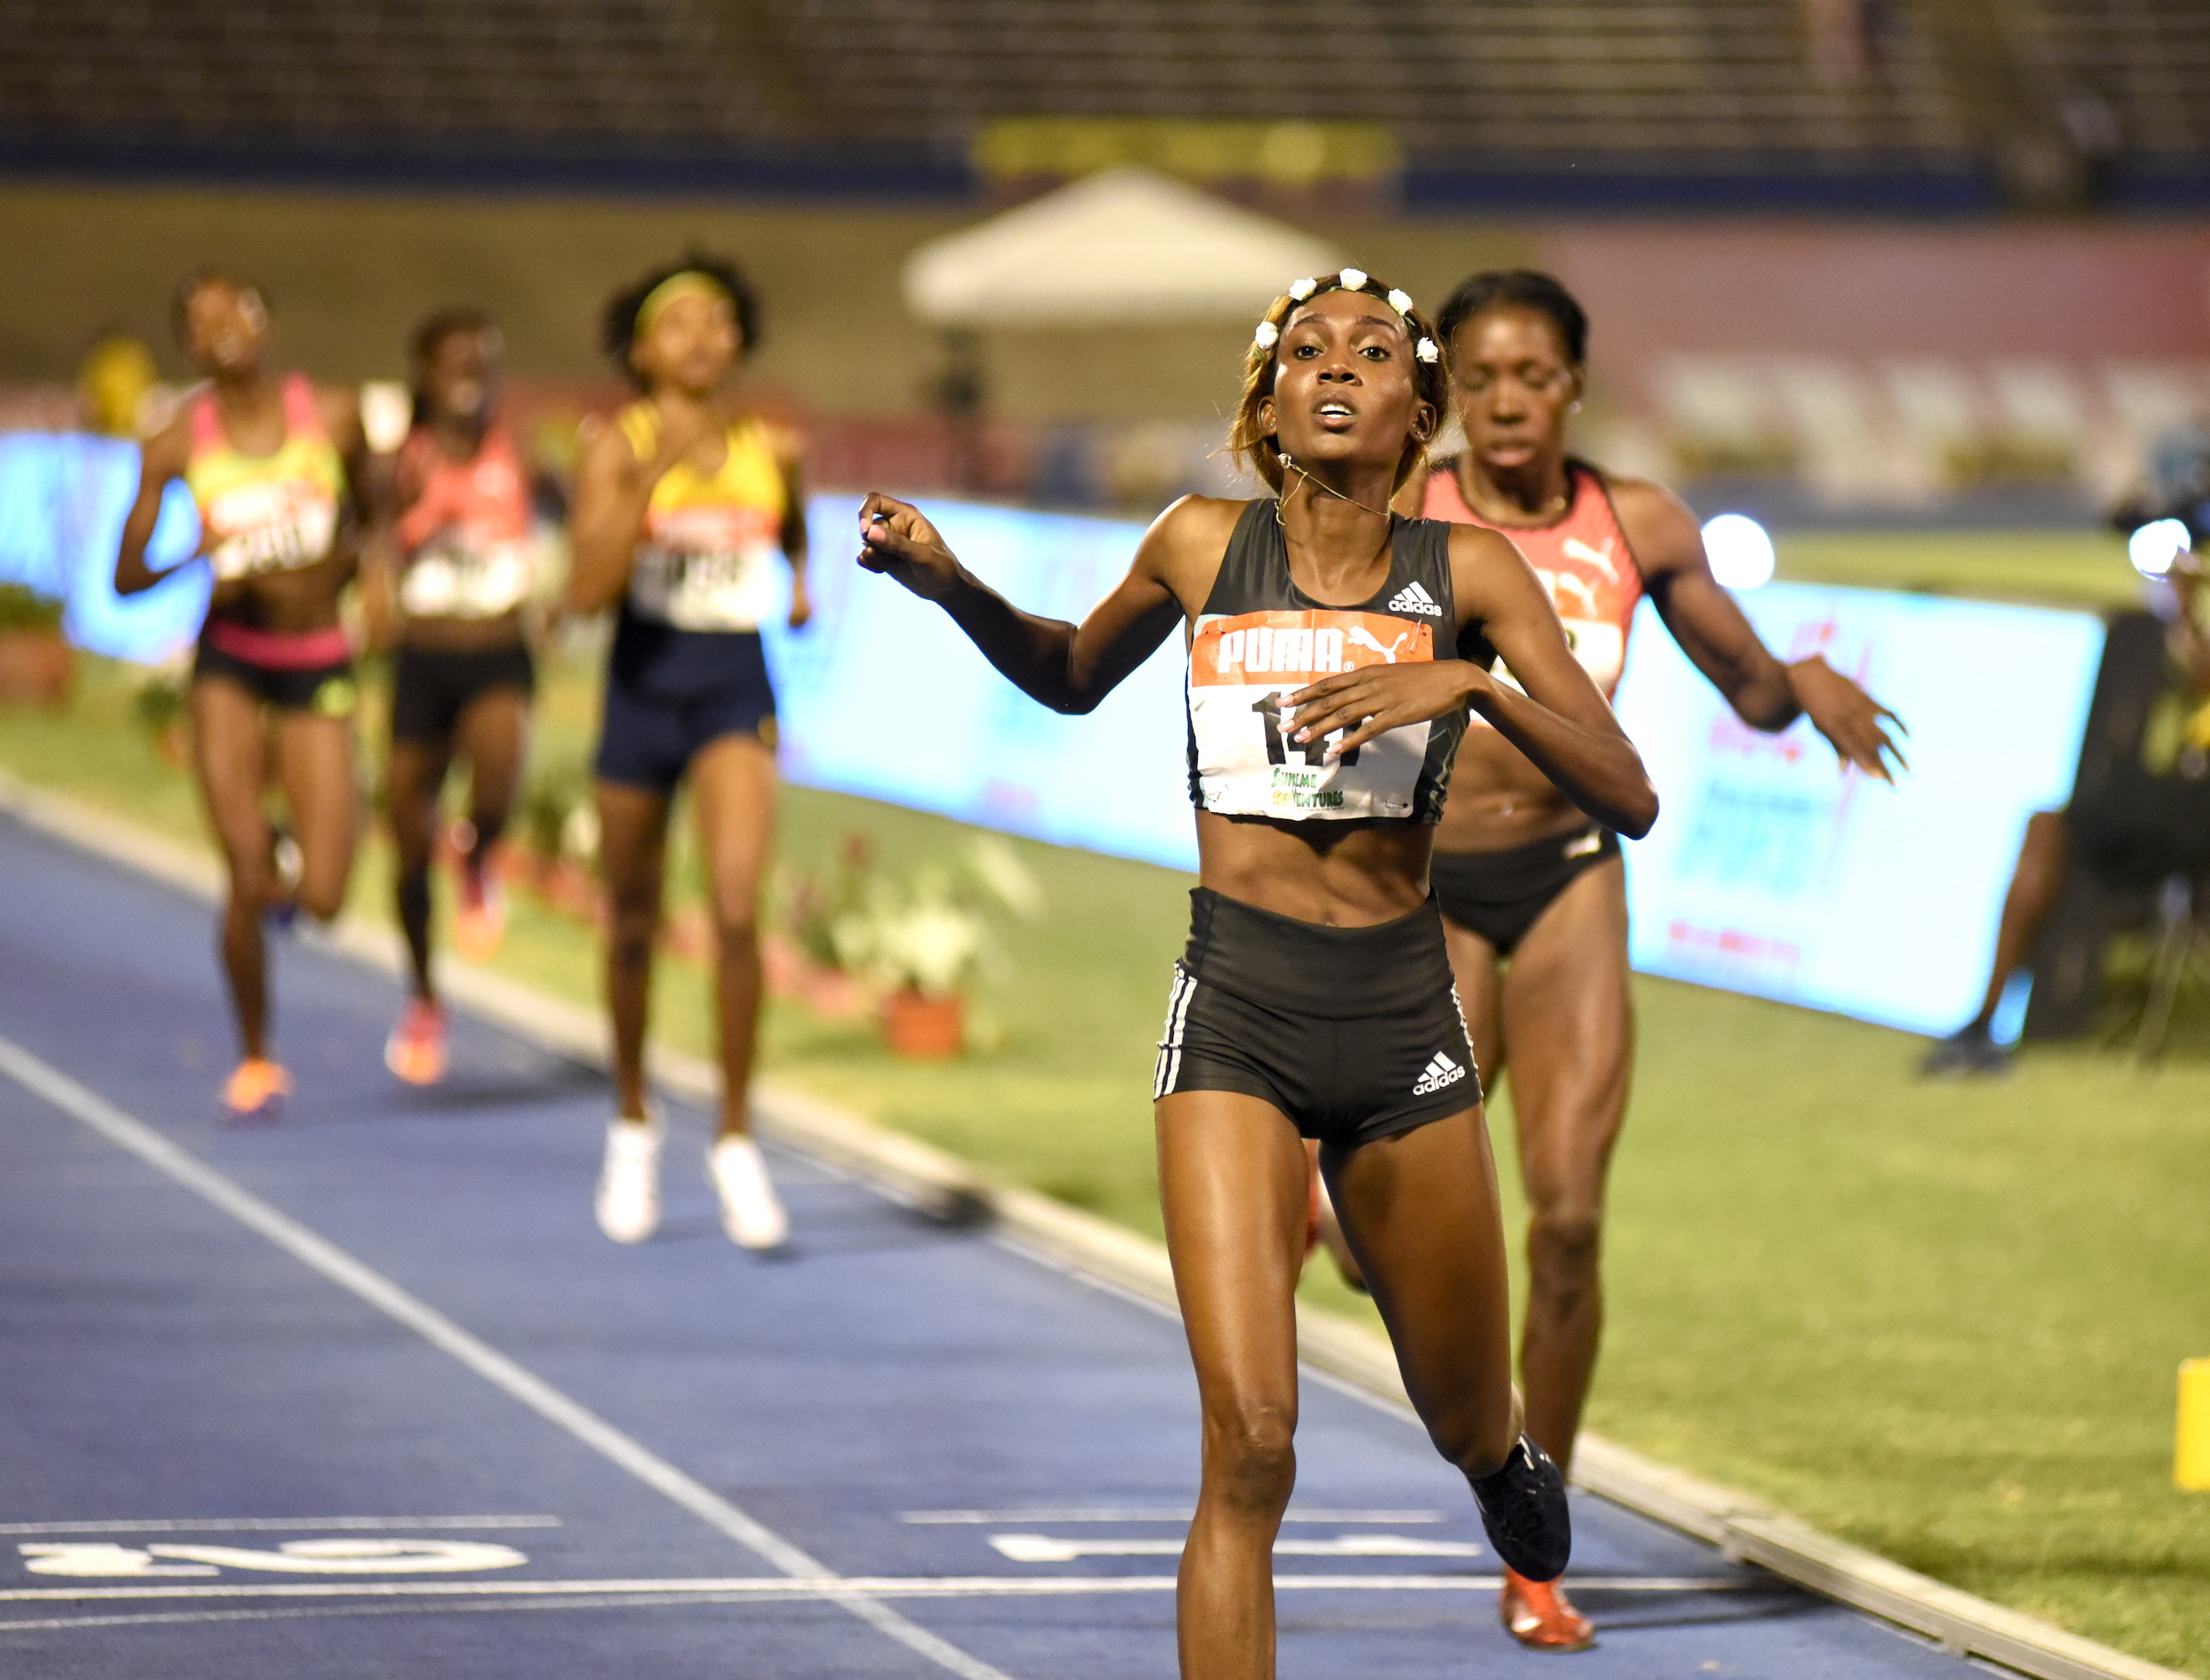 Goule-Toppin shines at Jamaica Olympic trials